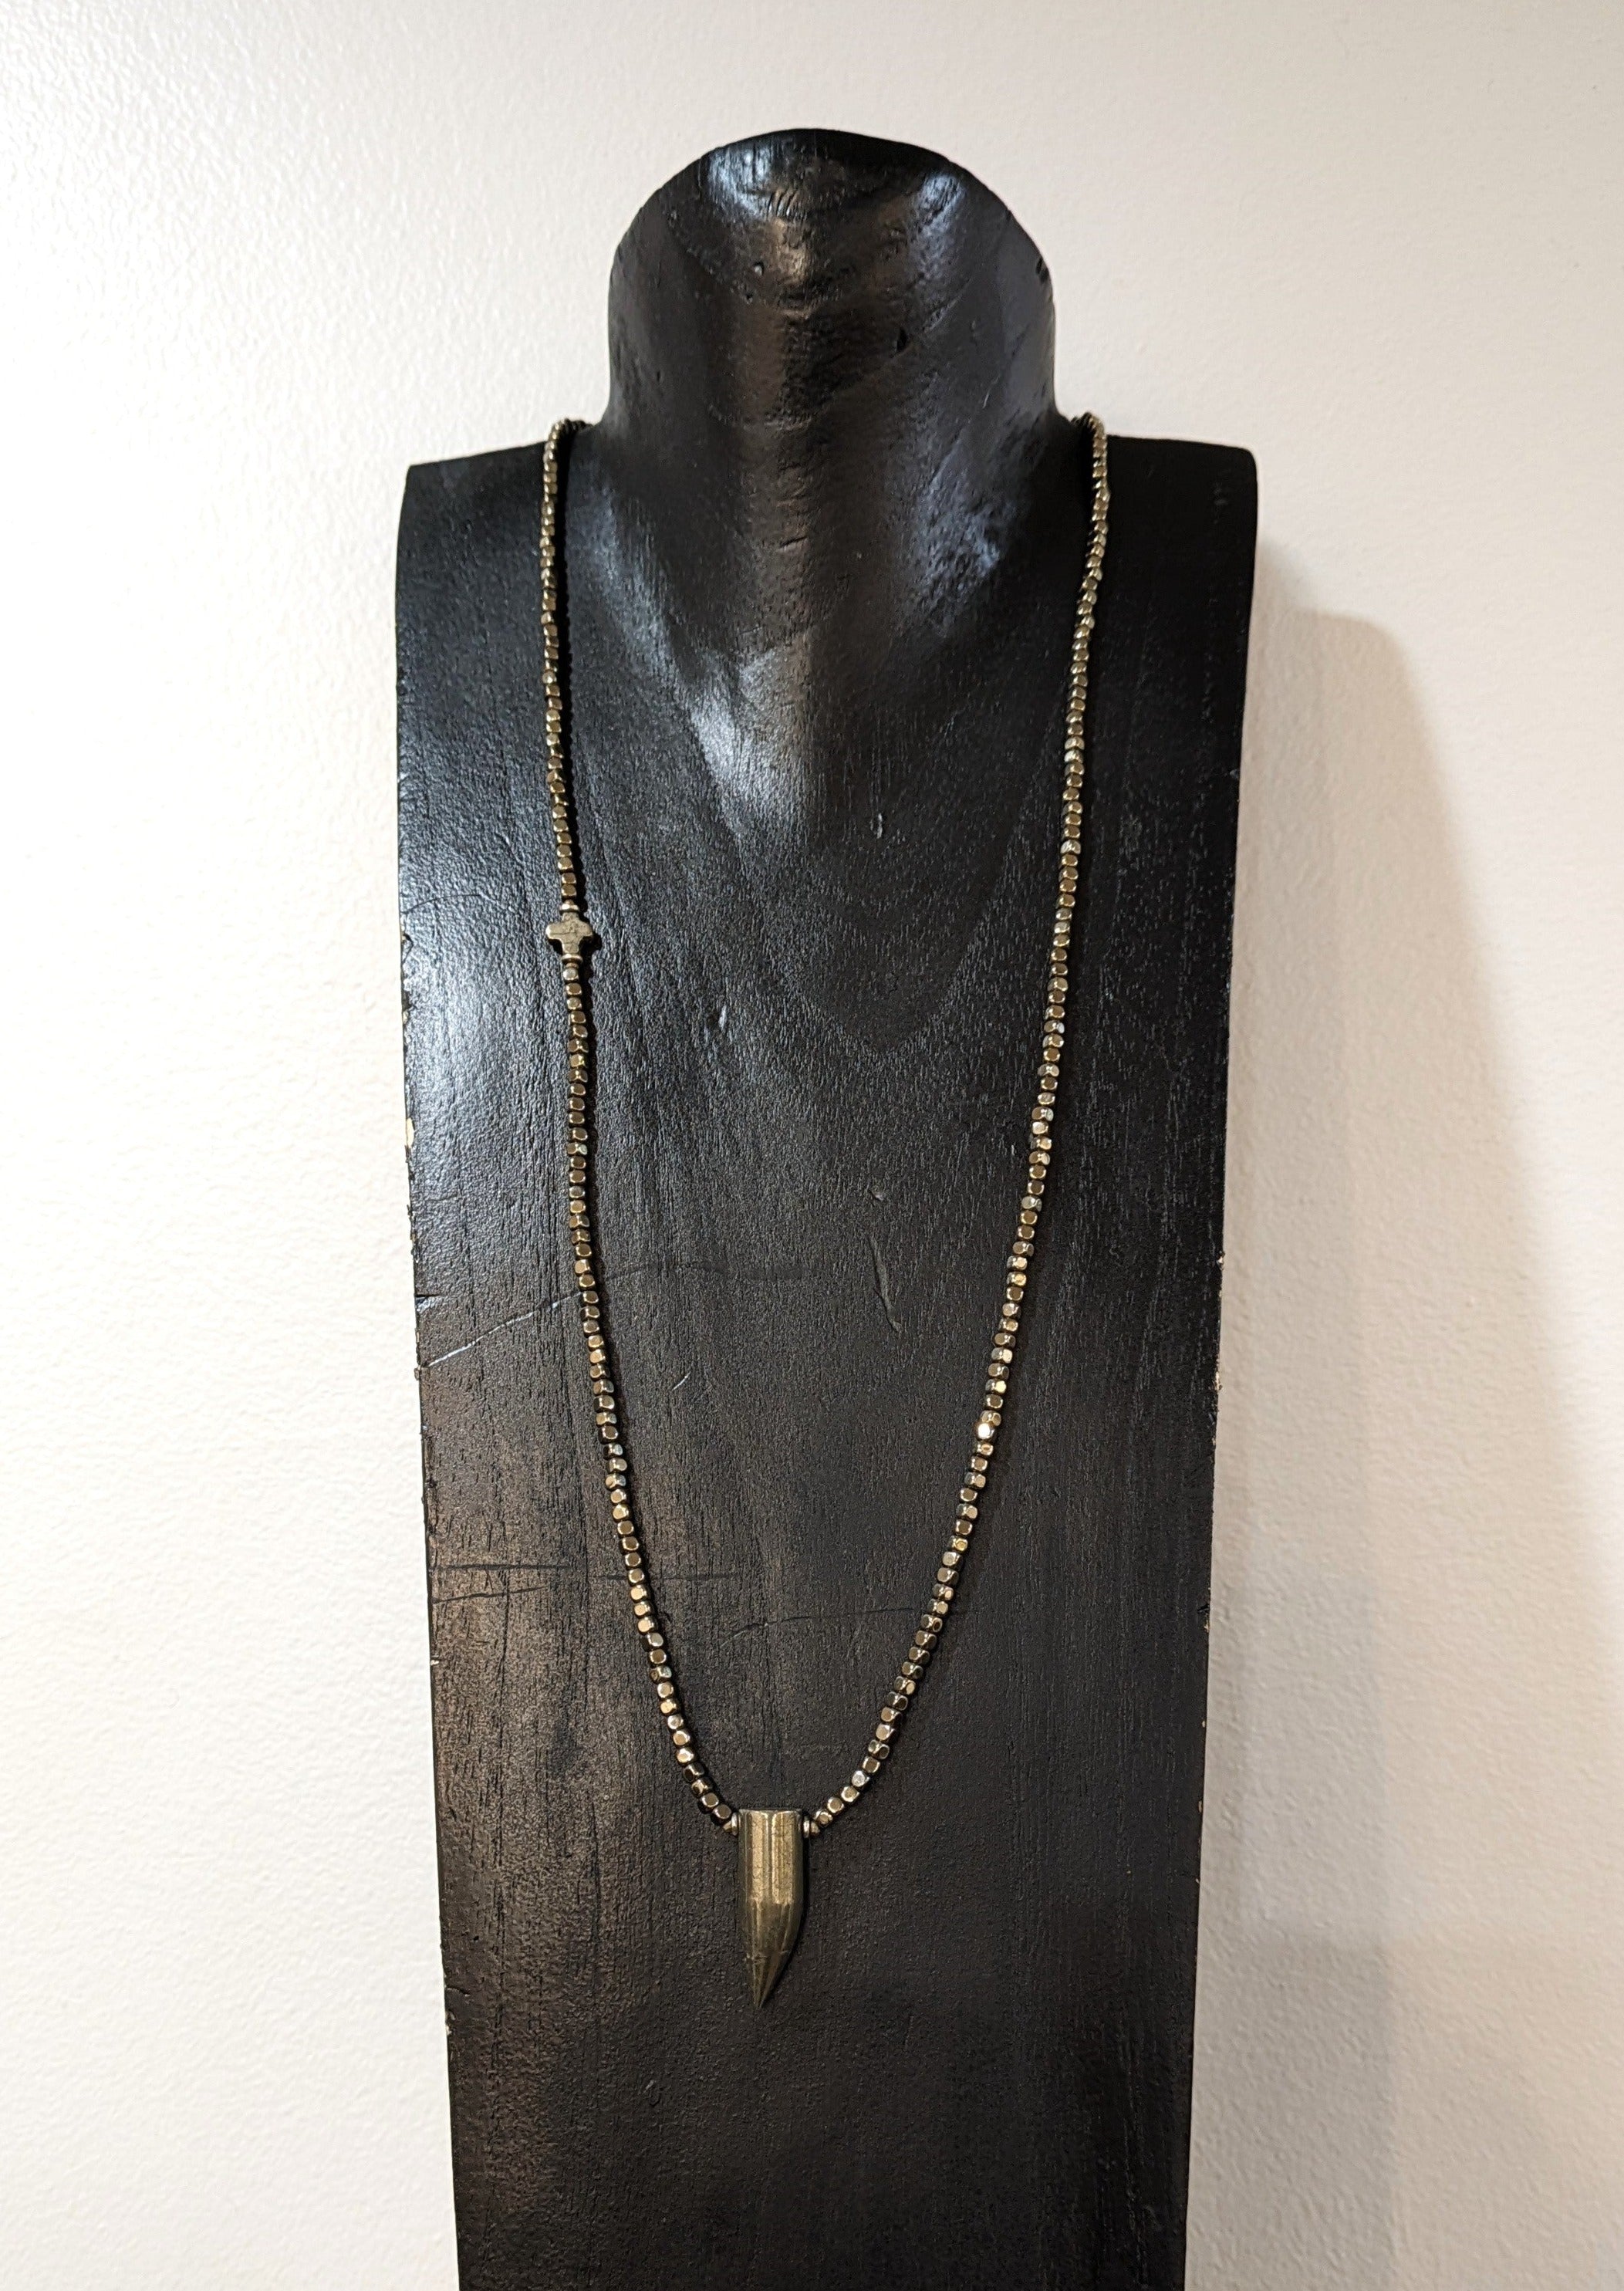 DINKYTOWN NECKLACE